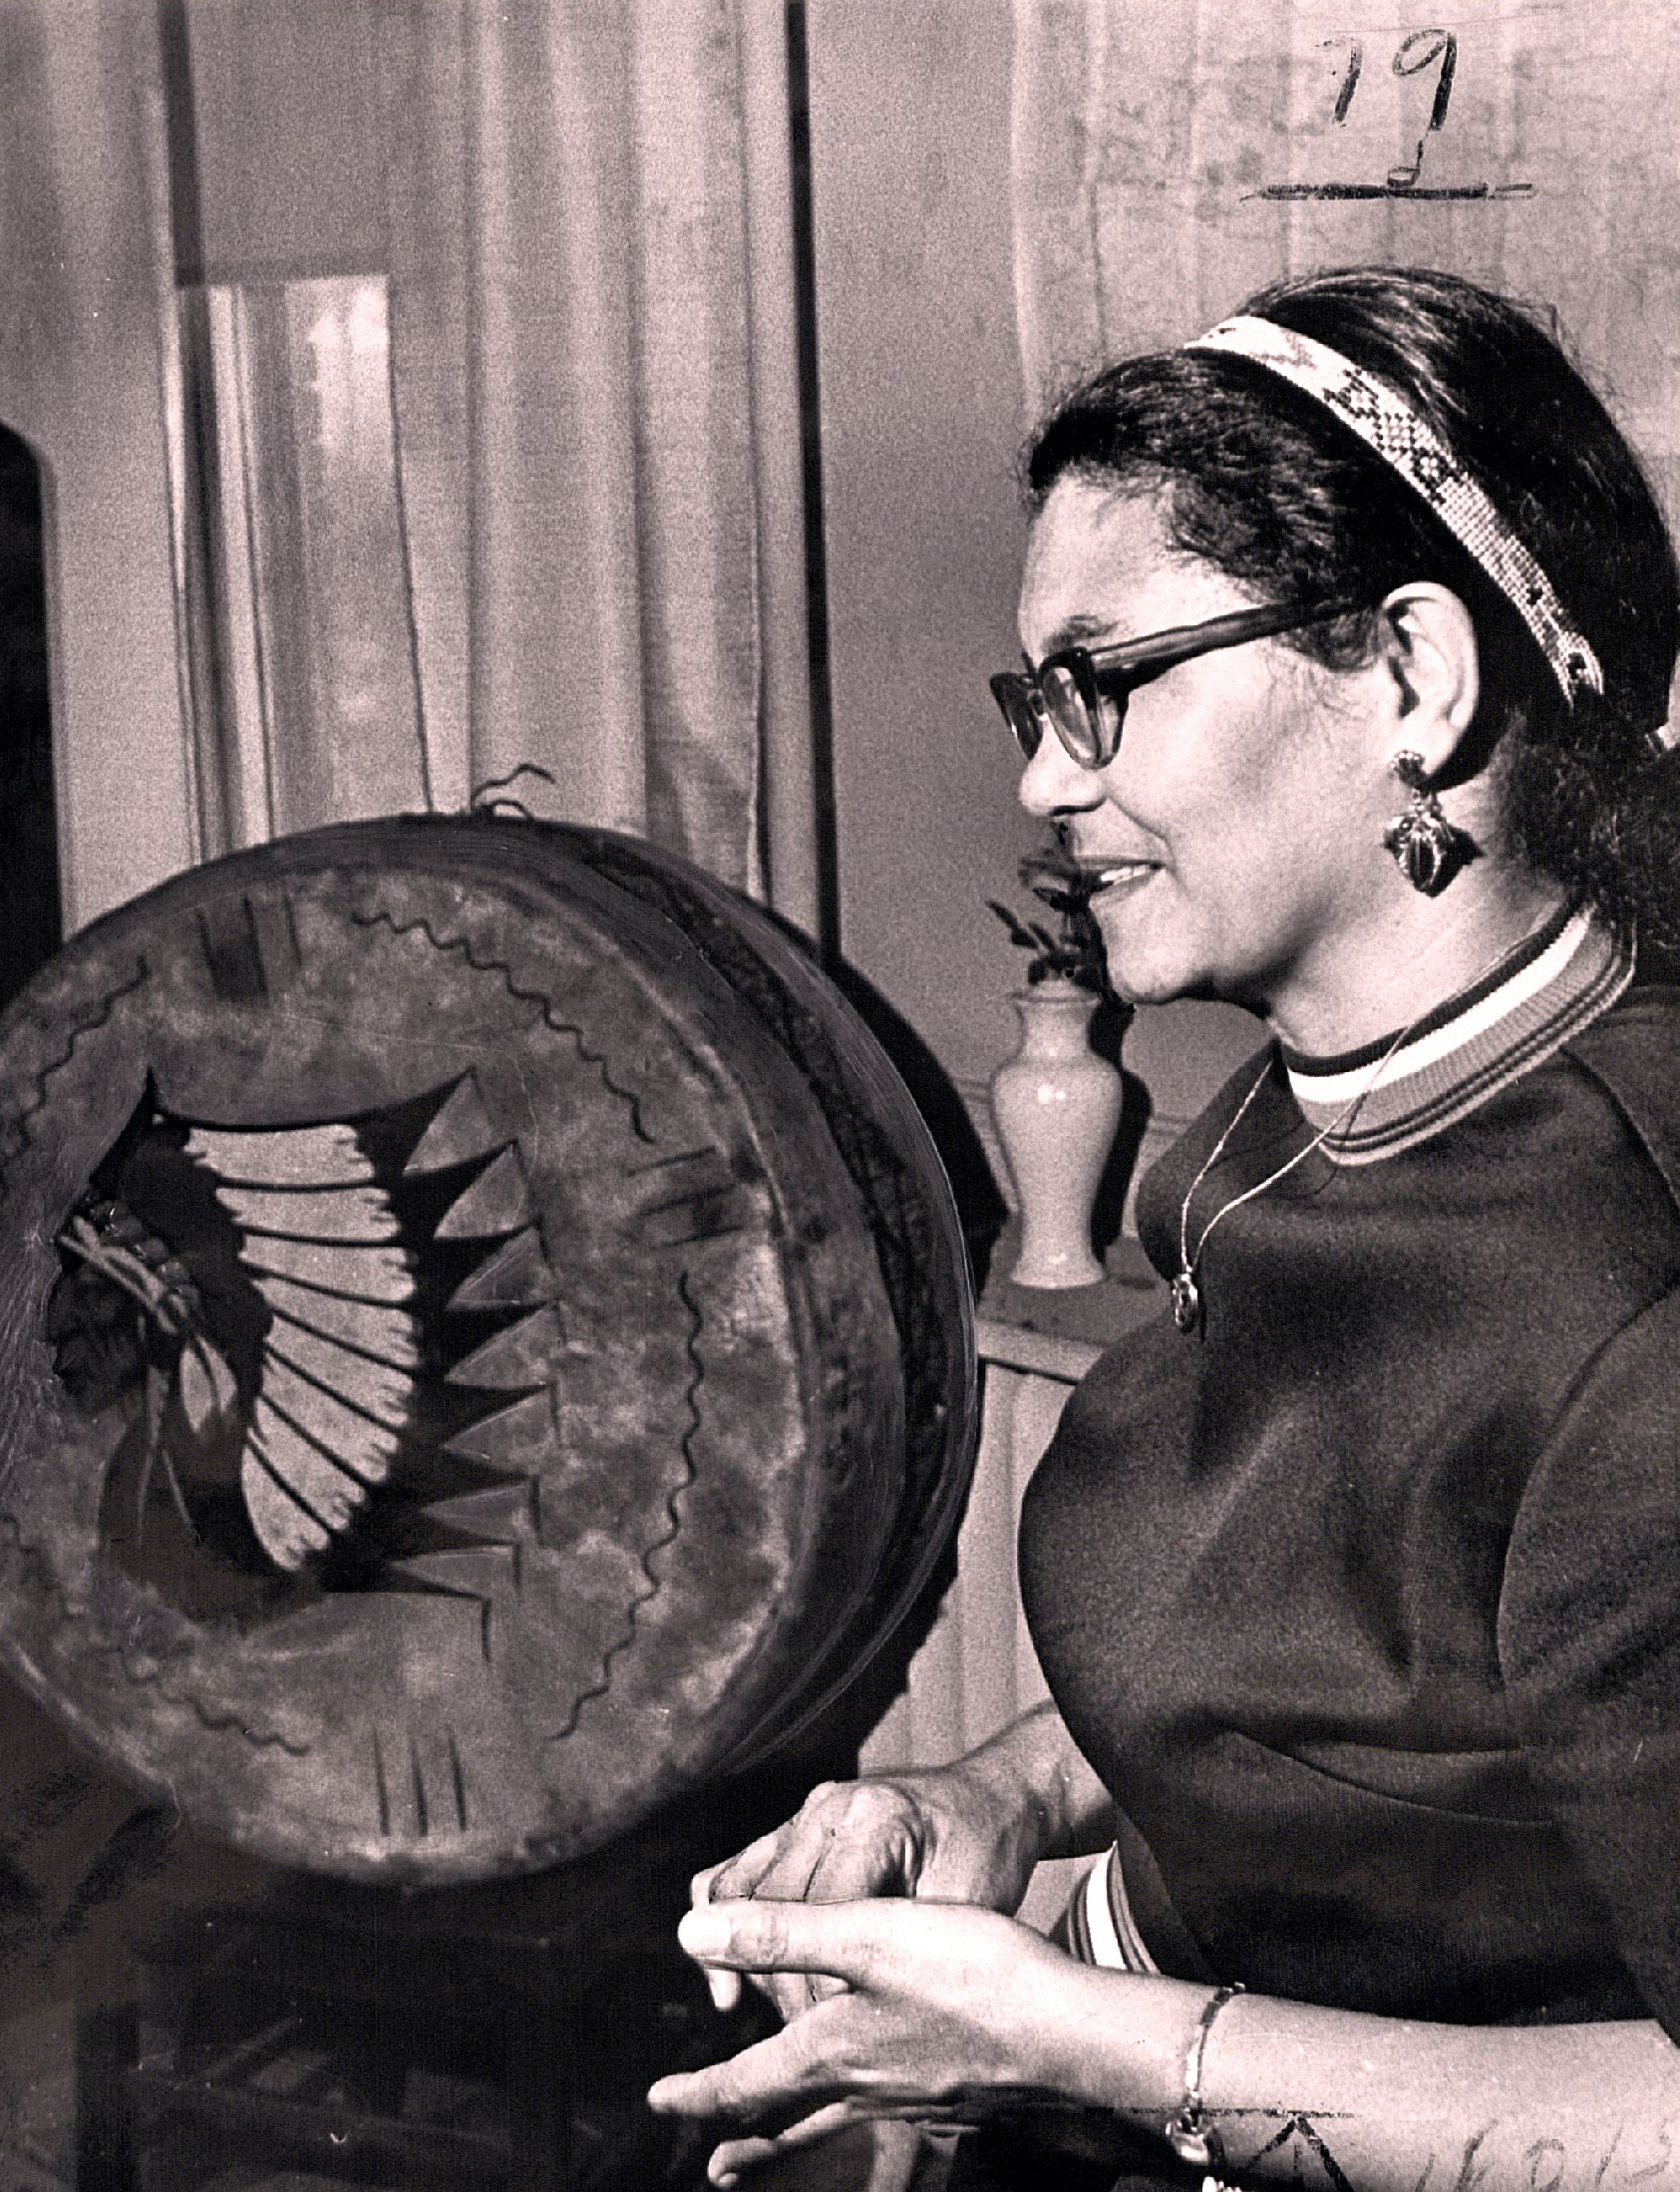 A black and white profile of Elizabeth Locklear with a large animal hide drum in the background. Elizabeth is in mid sentence clasping her hands with a beaded headband. Painted on the drum is the profile of a person wearing a warbonnet.